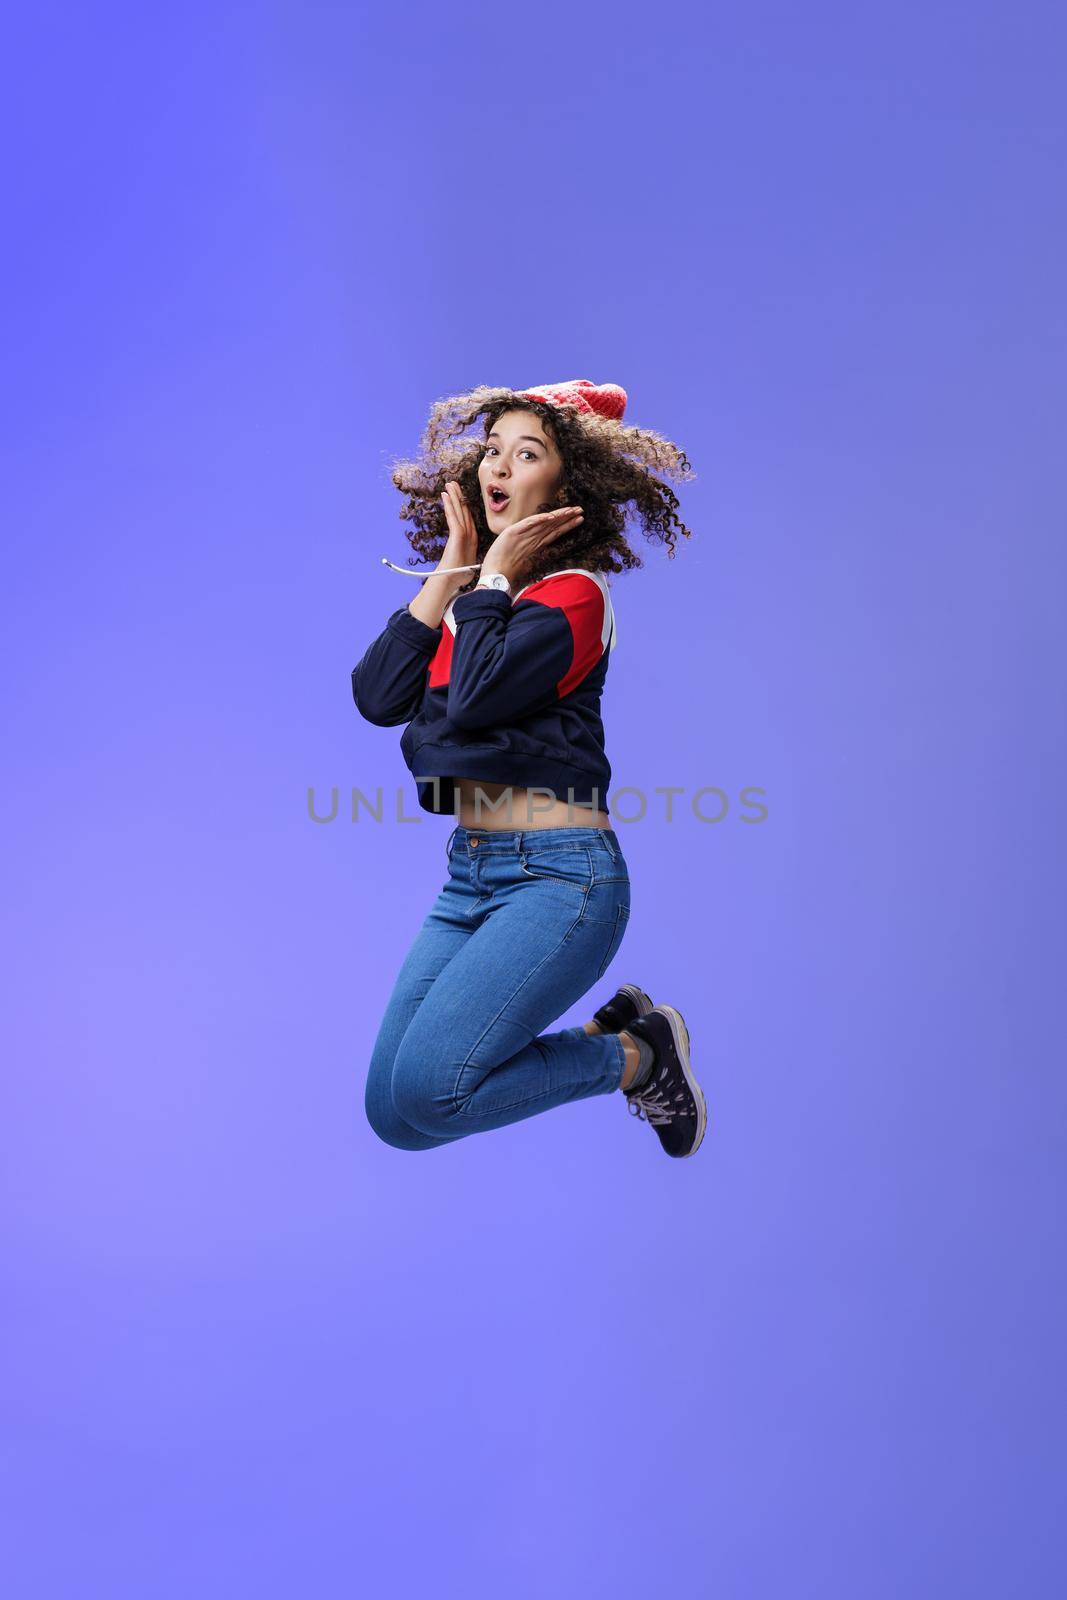 Surprised and amazed amused good-looking woman with curly hair in winter beanie and sweatshirt open mouth from joy and amazement jumping over blue background having fun feeling playful by Benzoix